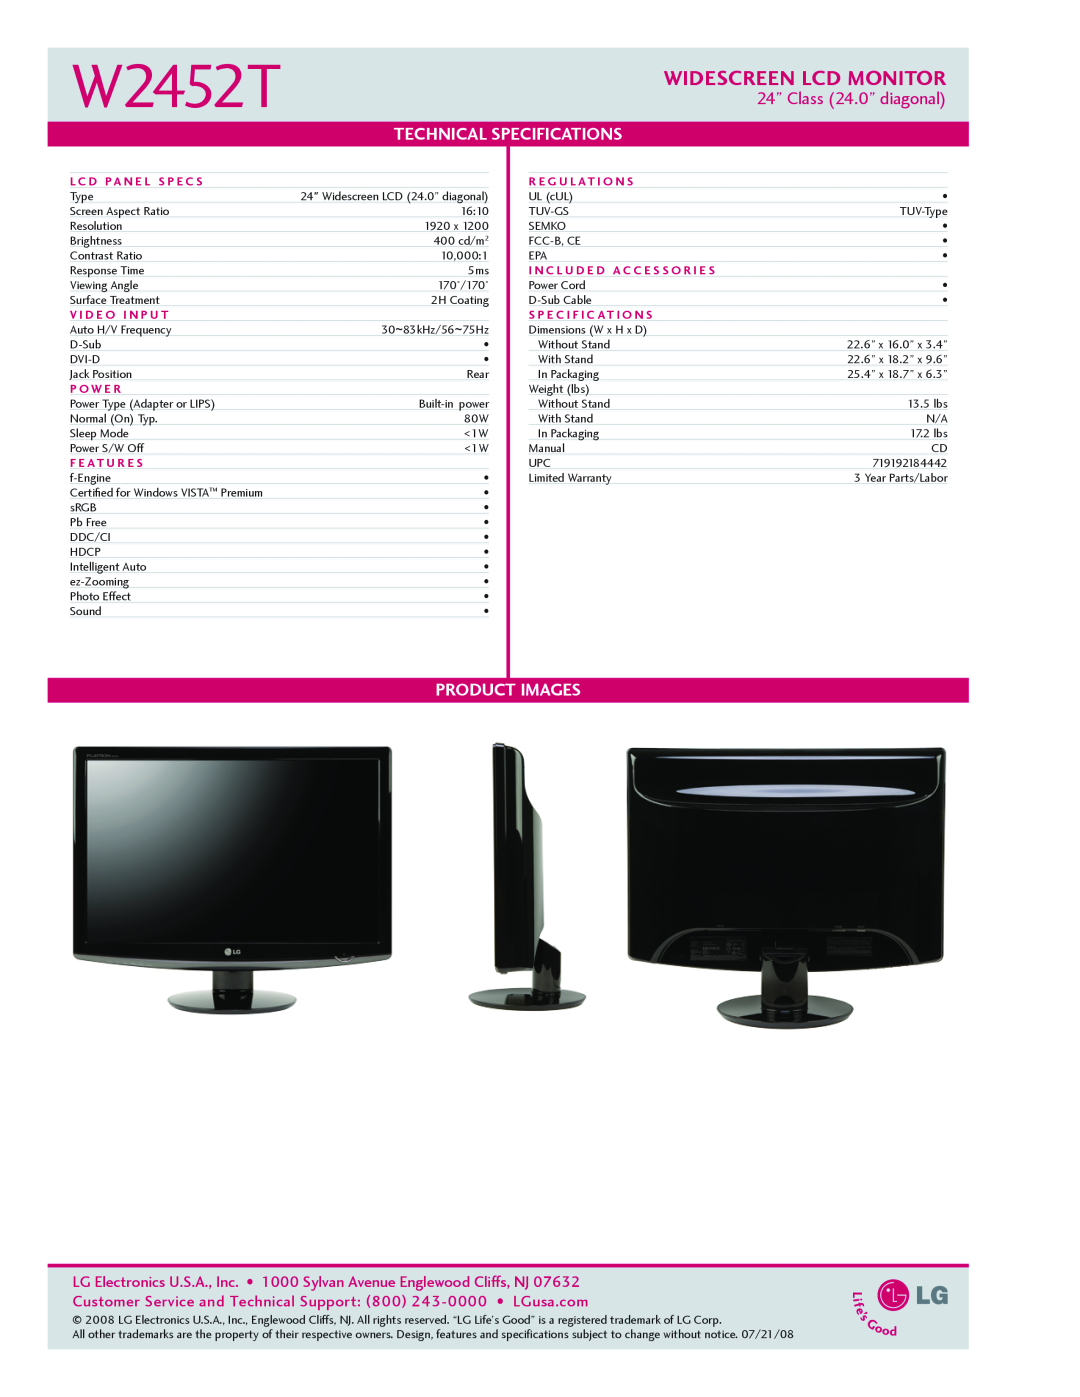 Goldstar W2452T Widescreen LCD Monitor, 24” Class 24.0” diagonal, Technical specifications, Product Images, P o w e r 